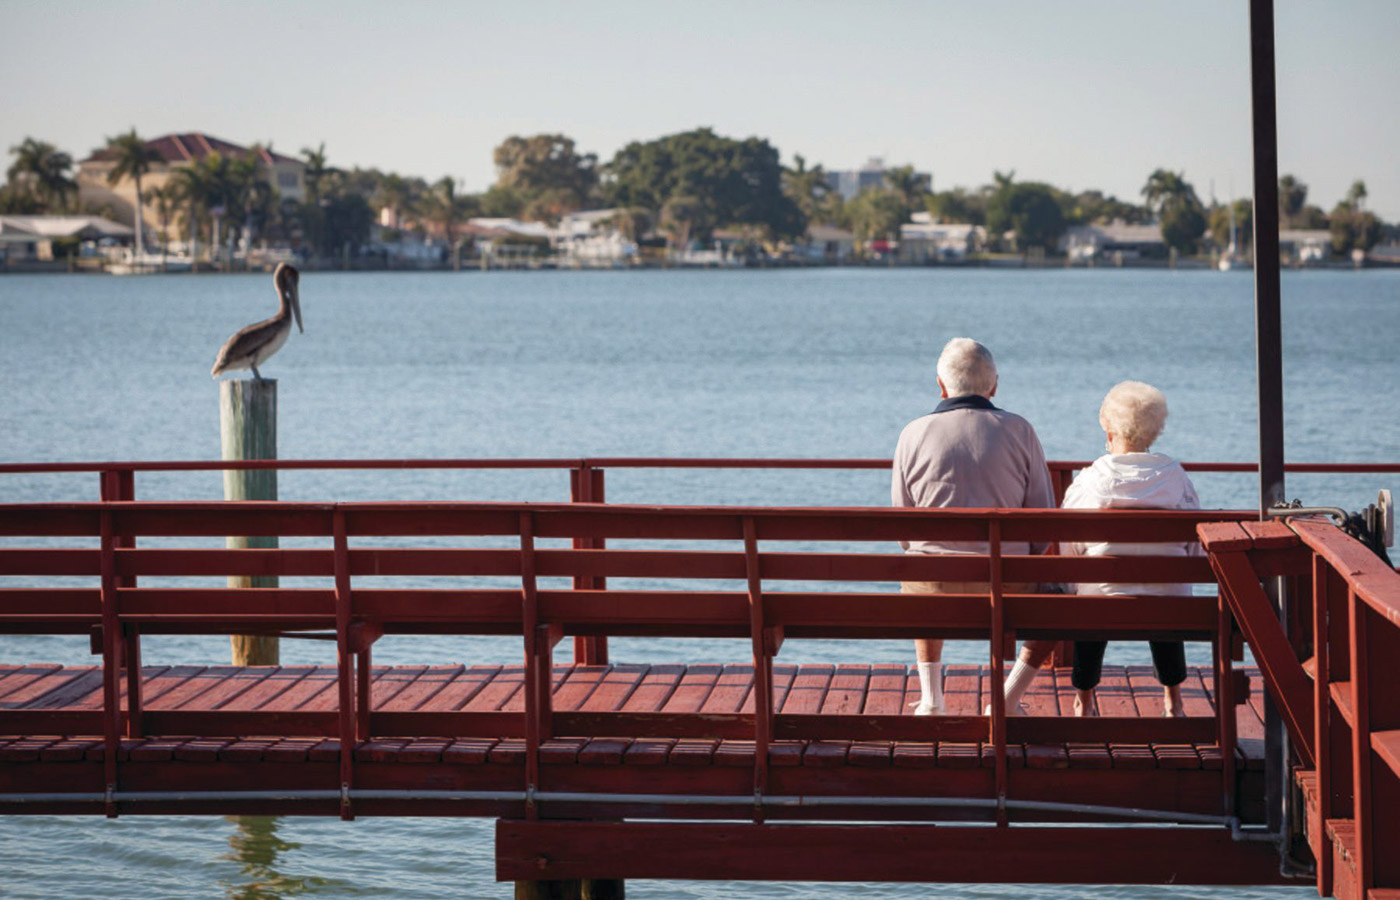 Elderly couple sitting on the pier looking out towards the bay